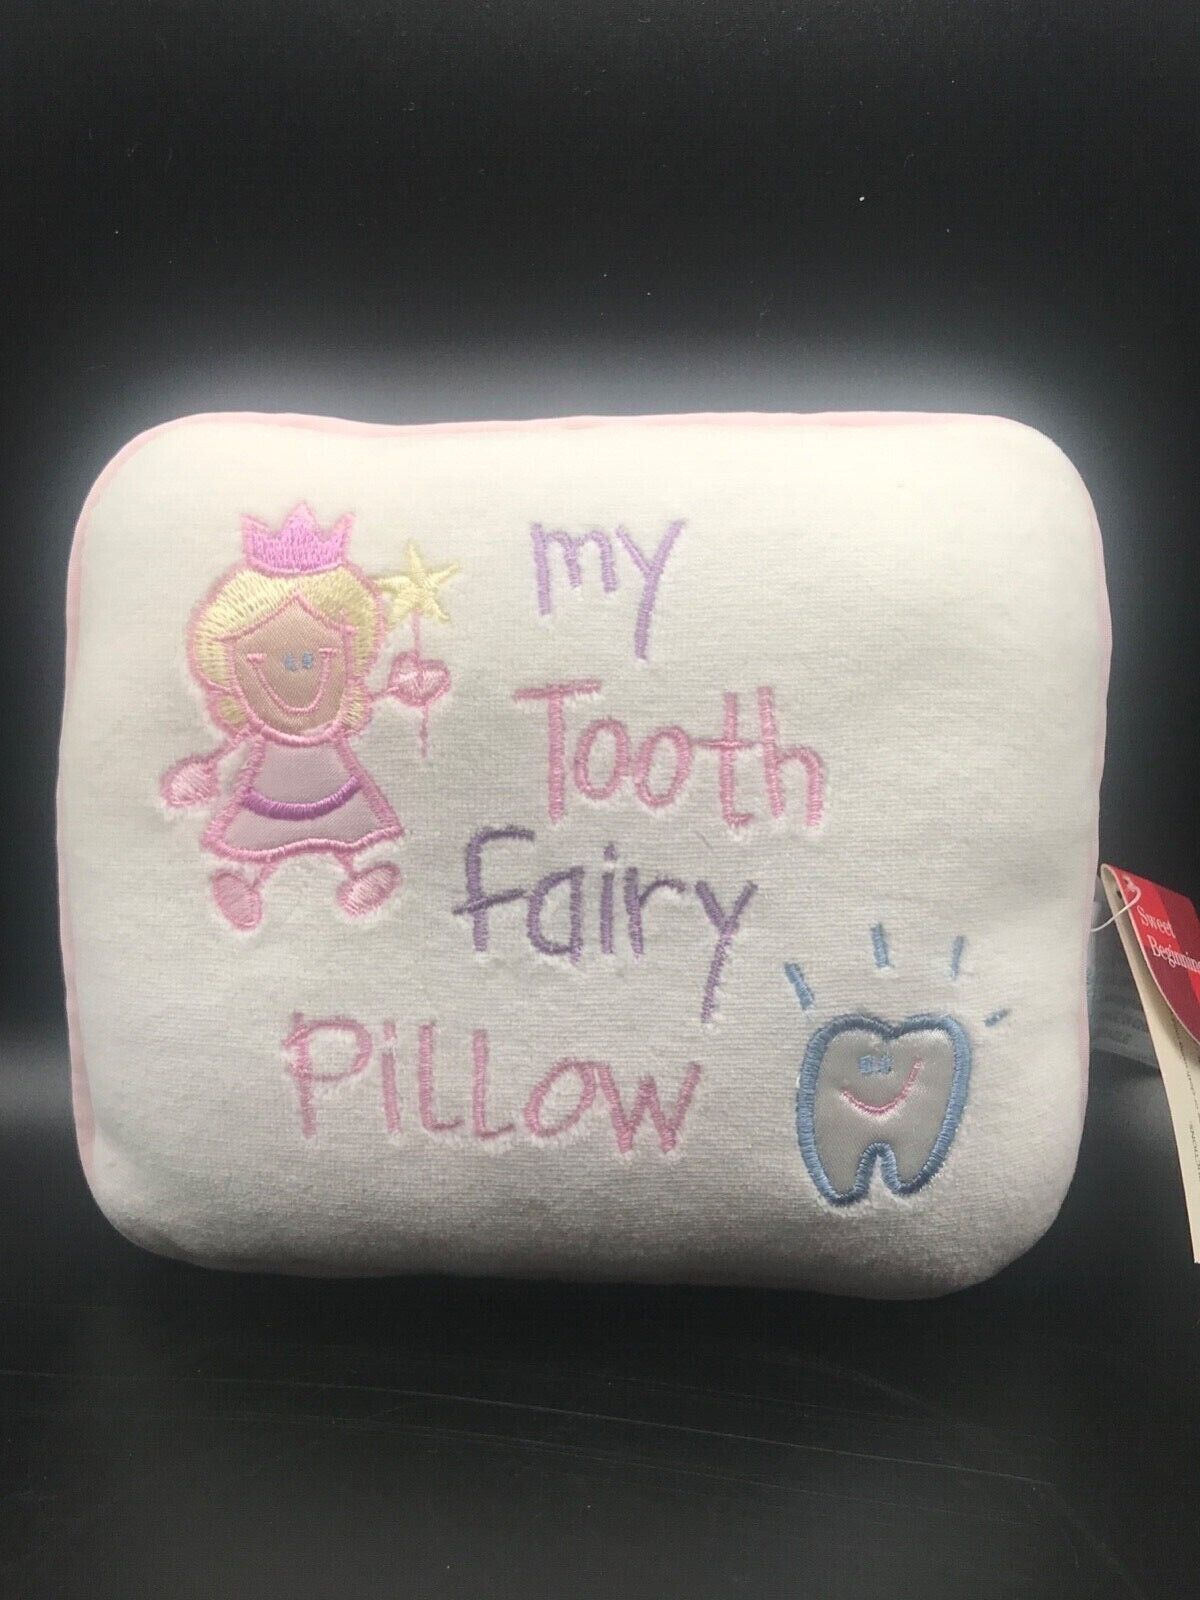 Baby Girl's White & Pink - "my Tooth Fairy Pillow", Yellow - Star Pocket, Nwt